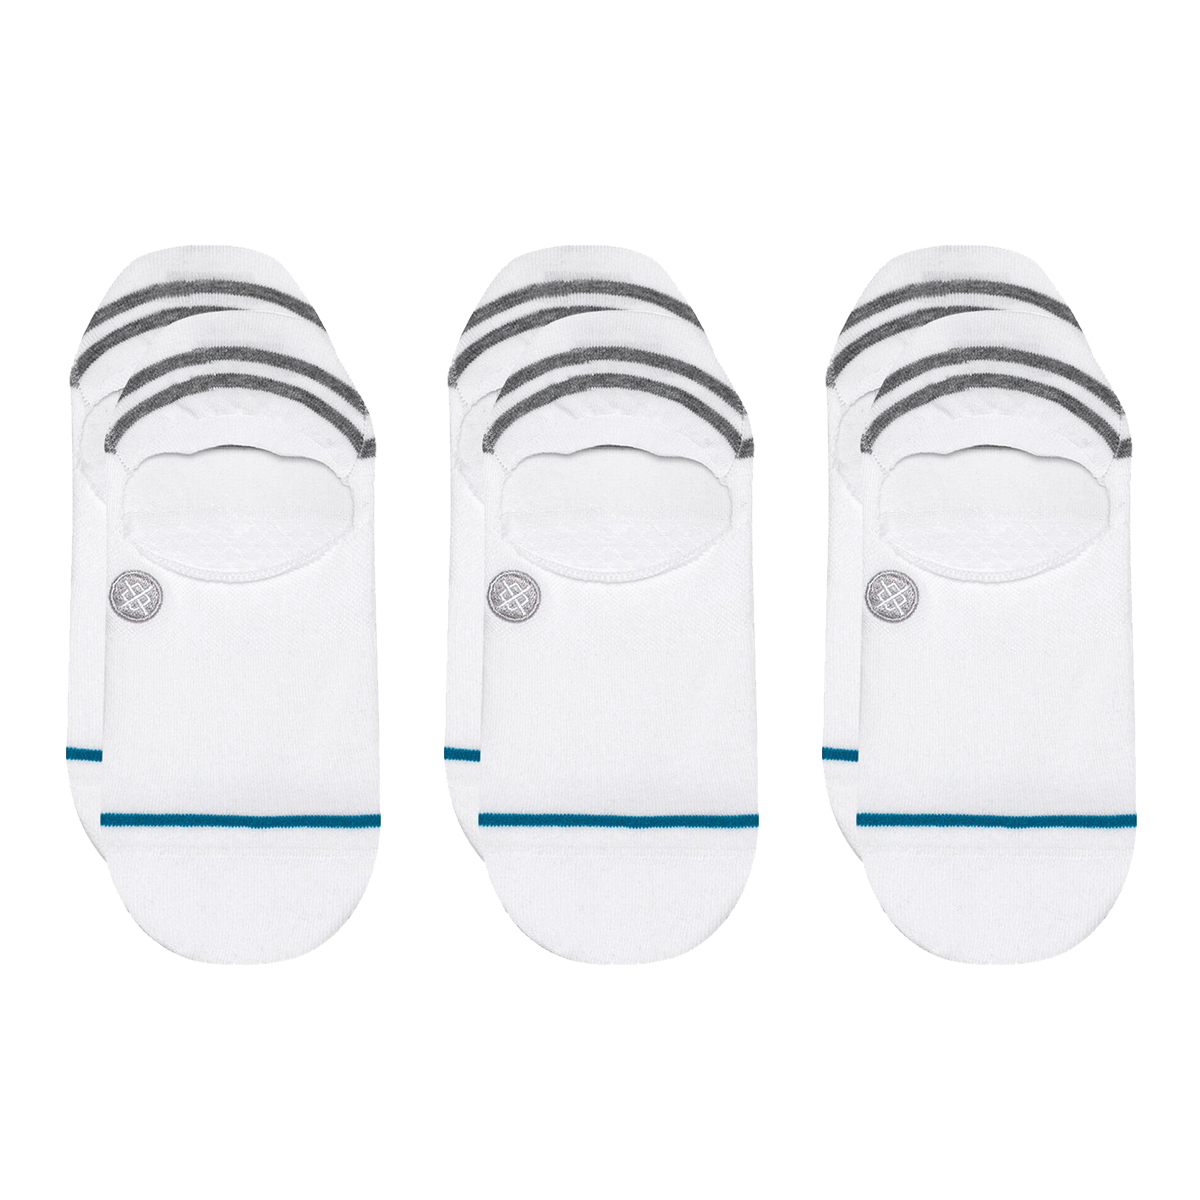 Gamut 2 Invisible 3Pack - White